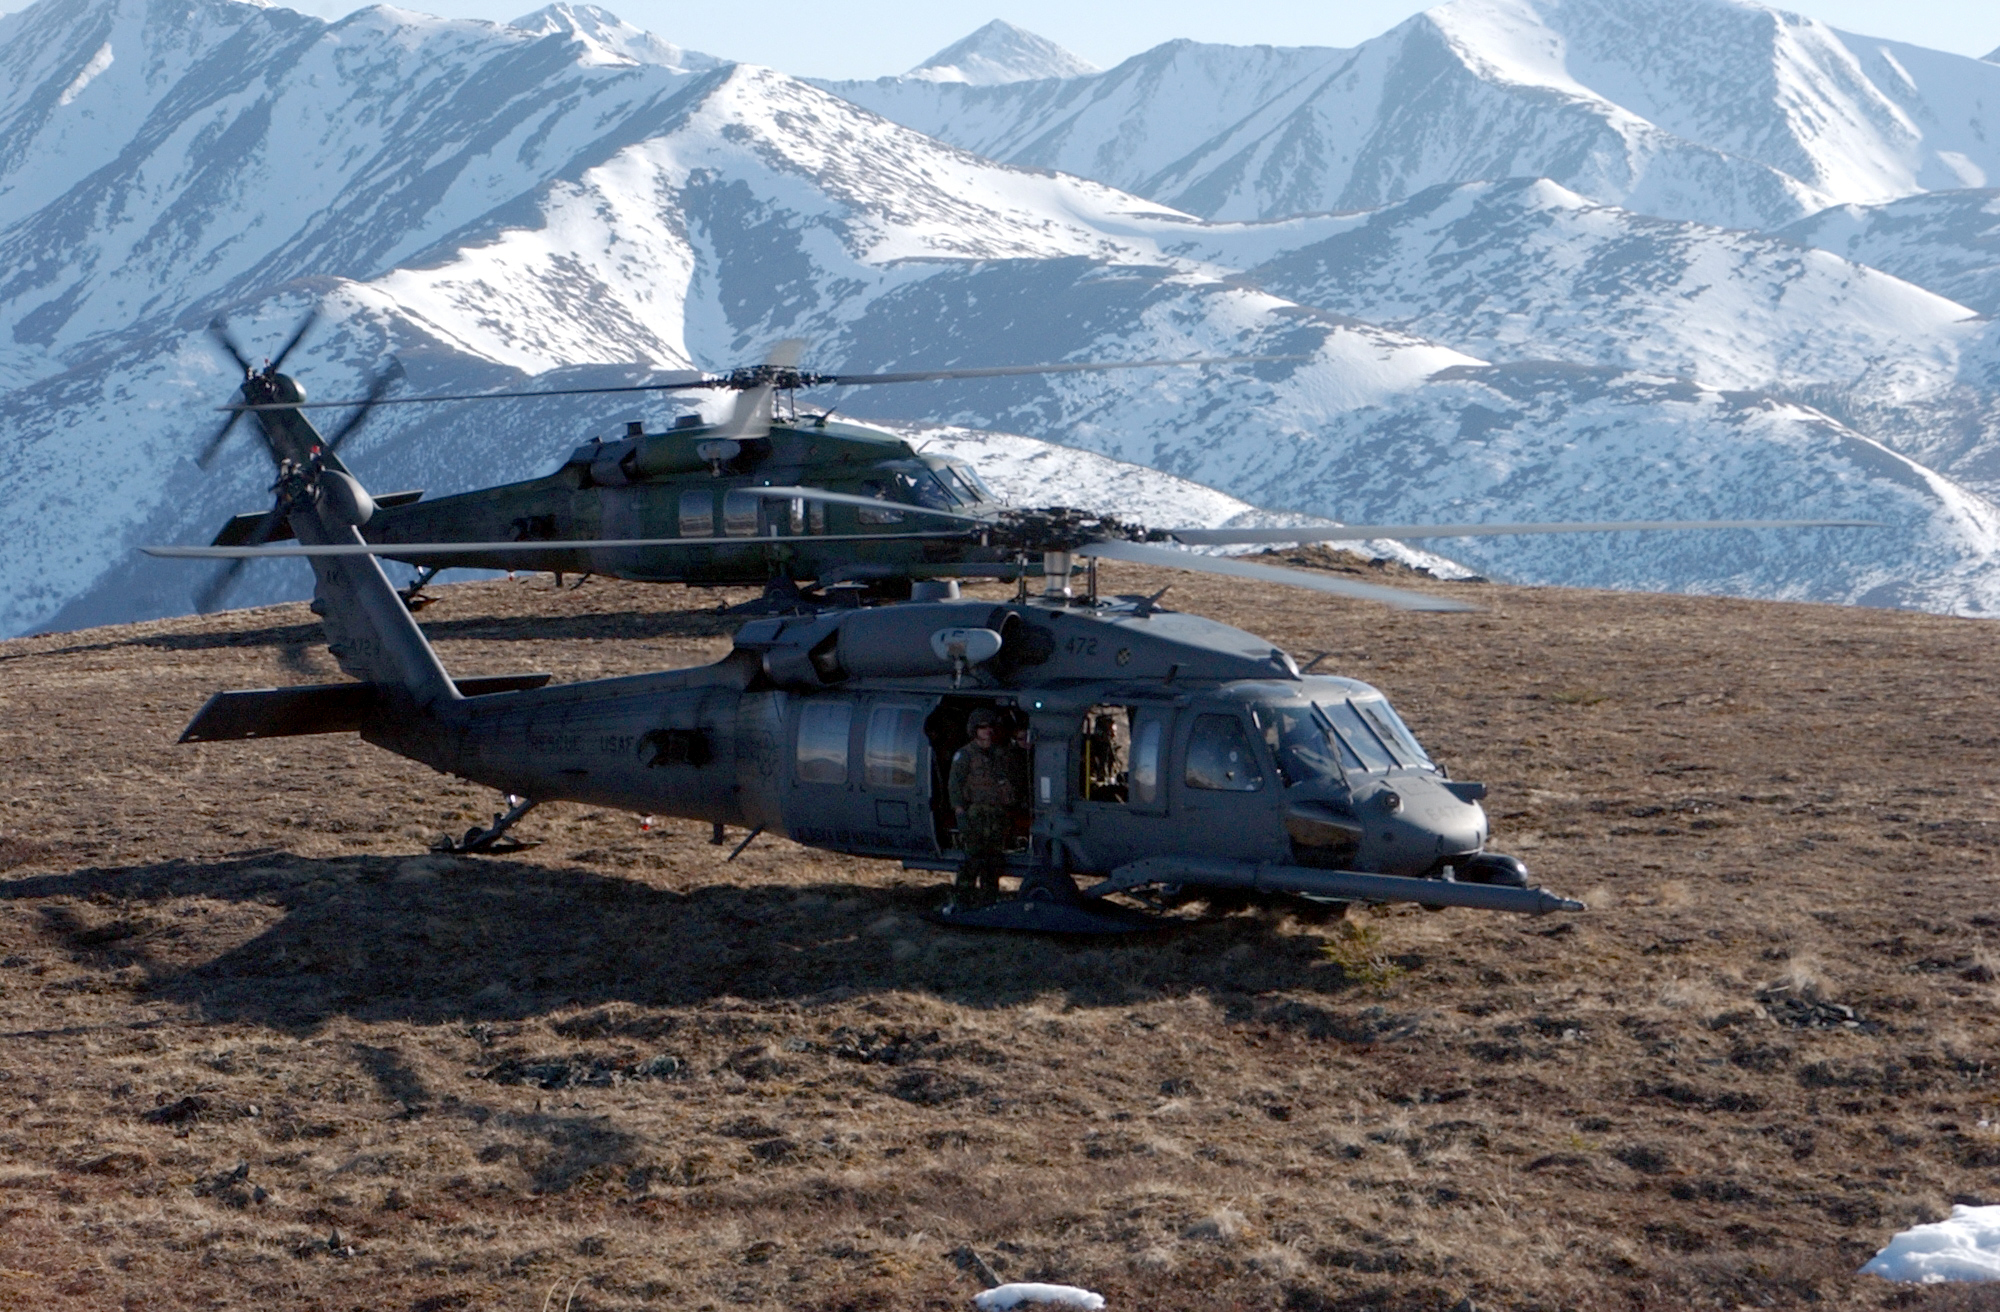 Two UH-60 Pave Hawk helicopters on a mountain